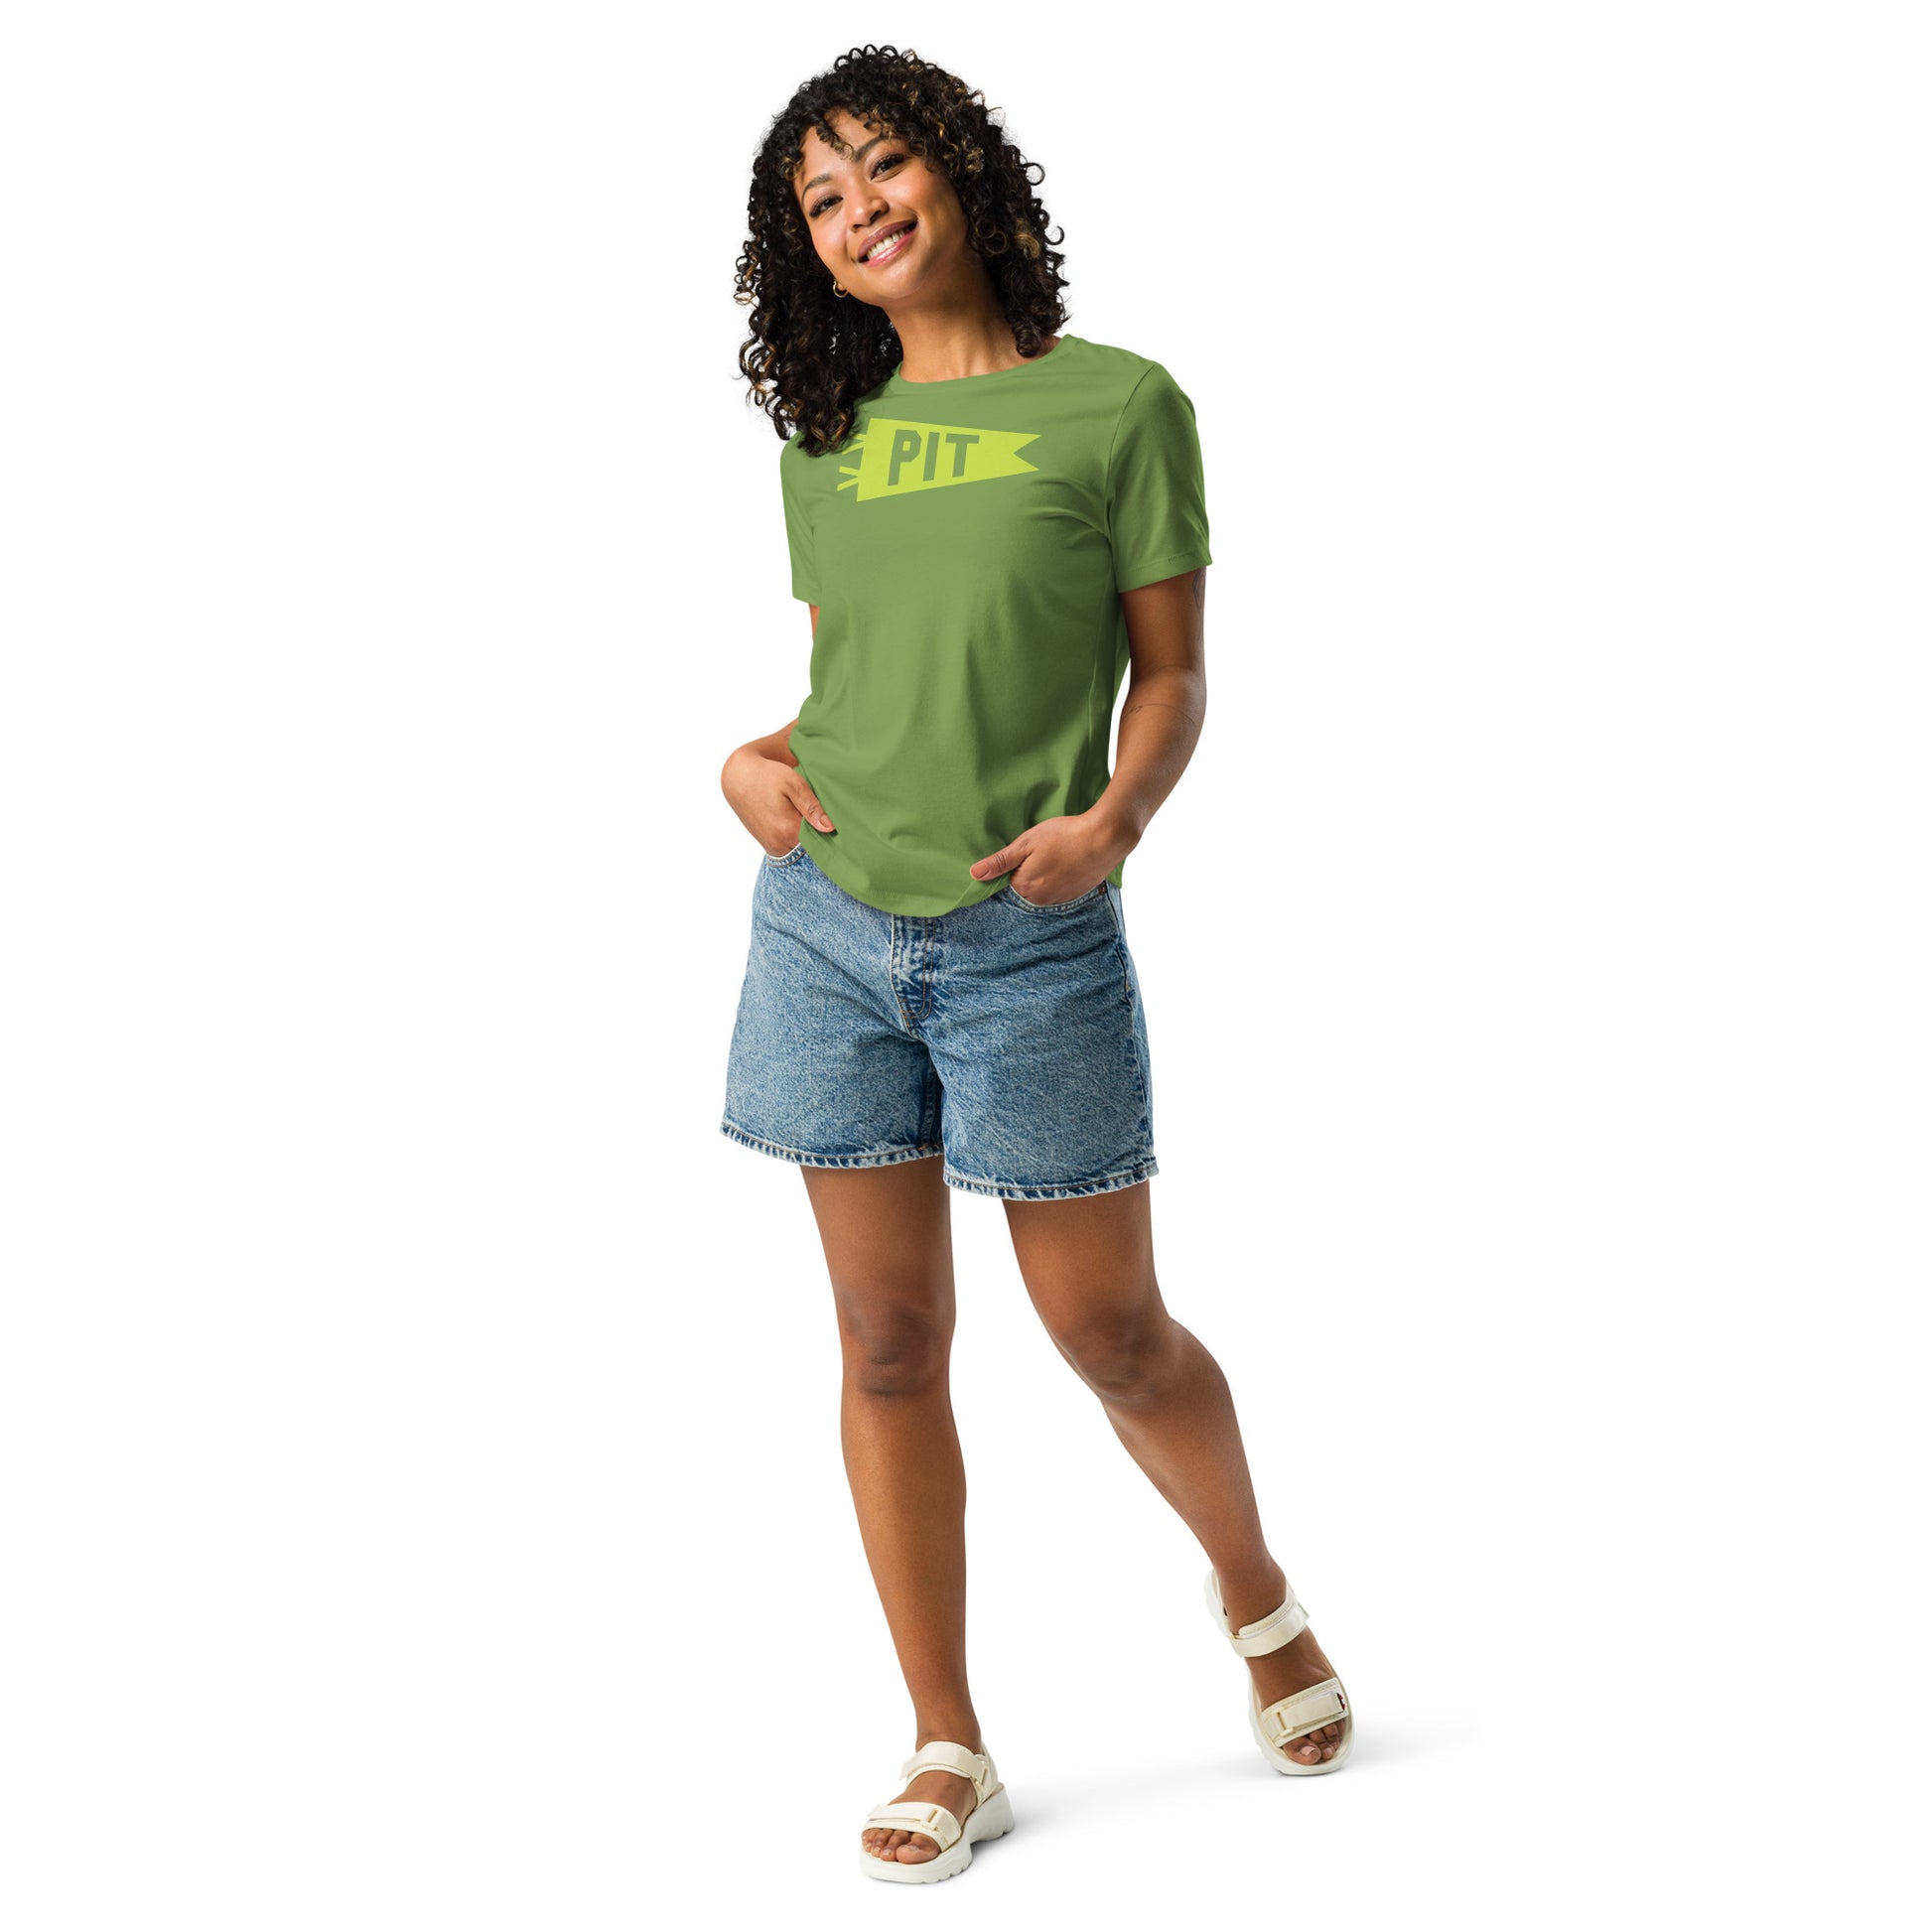 Airport Code Women's Tee - Green Graphic • PIT Pittsburgh • YHM Designs - Image 08